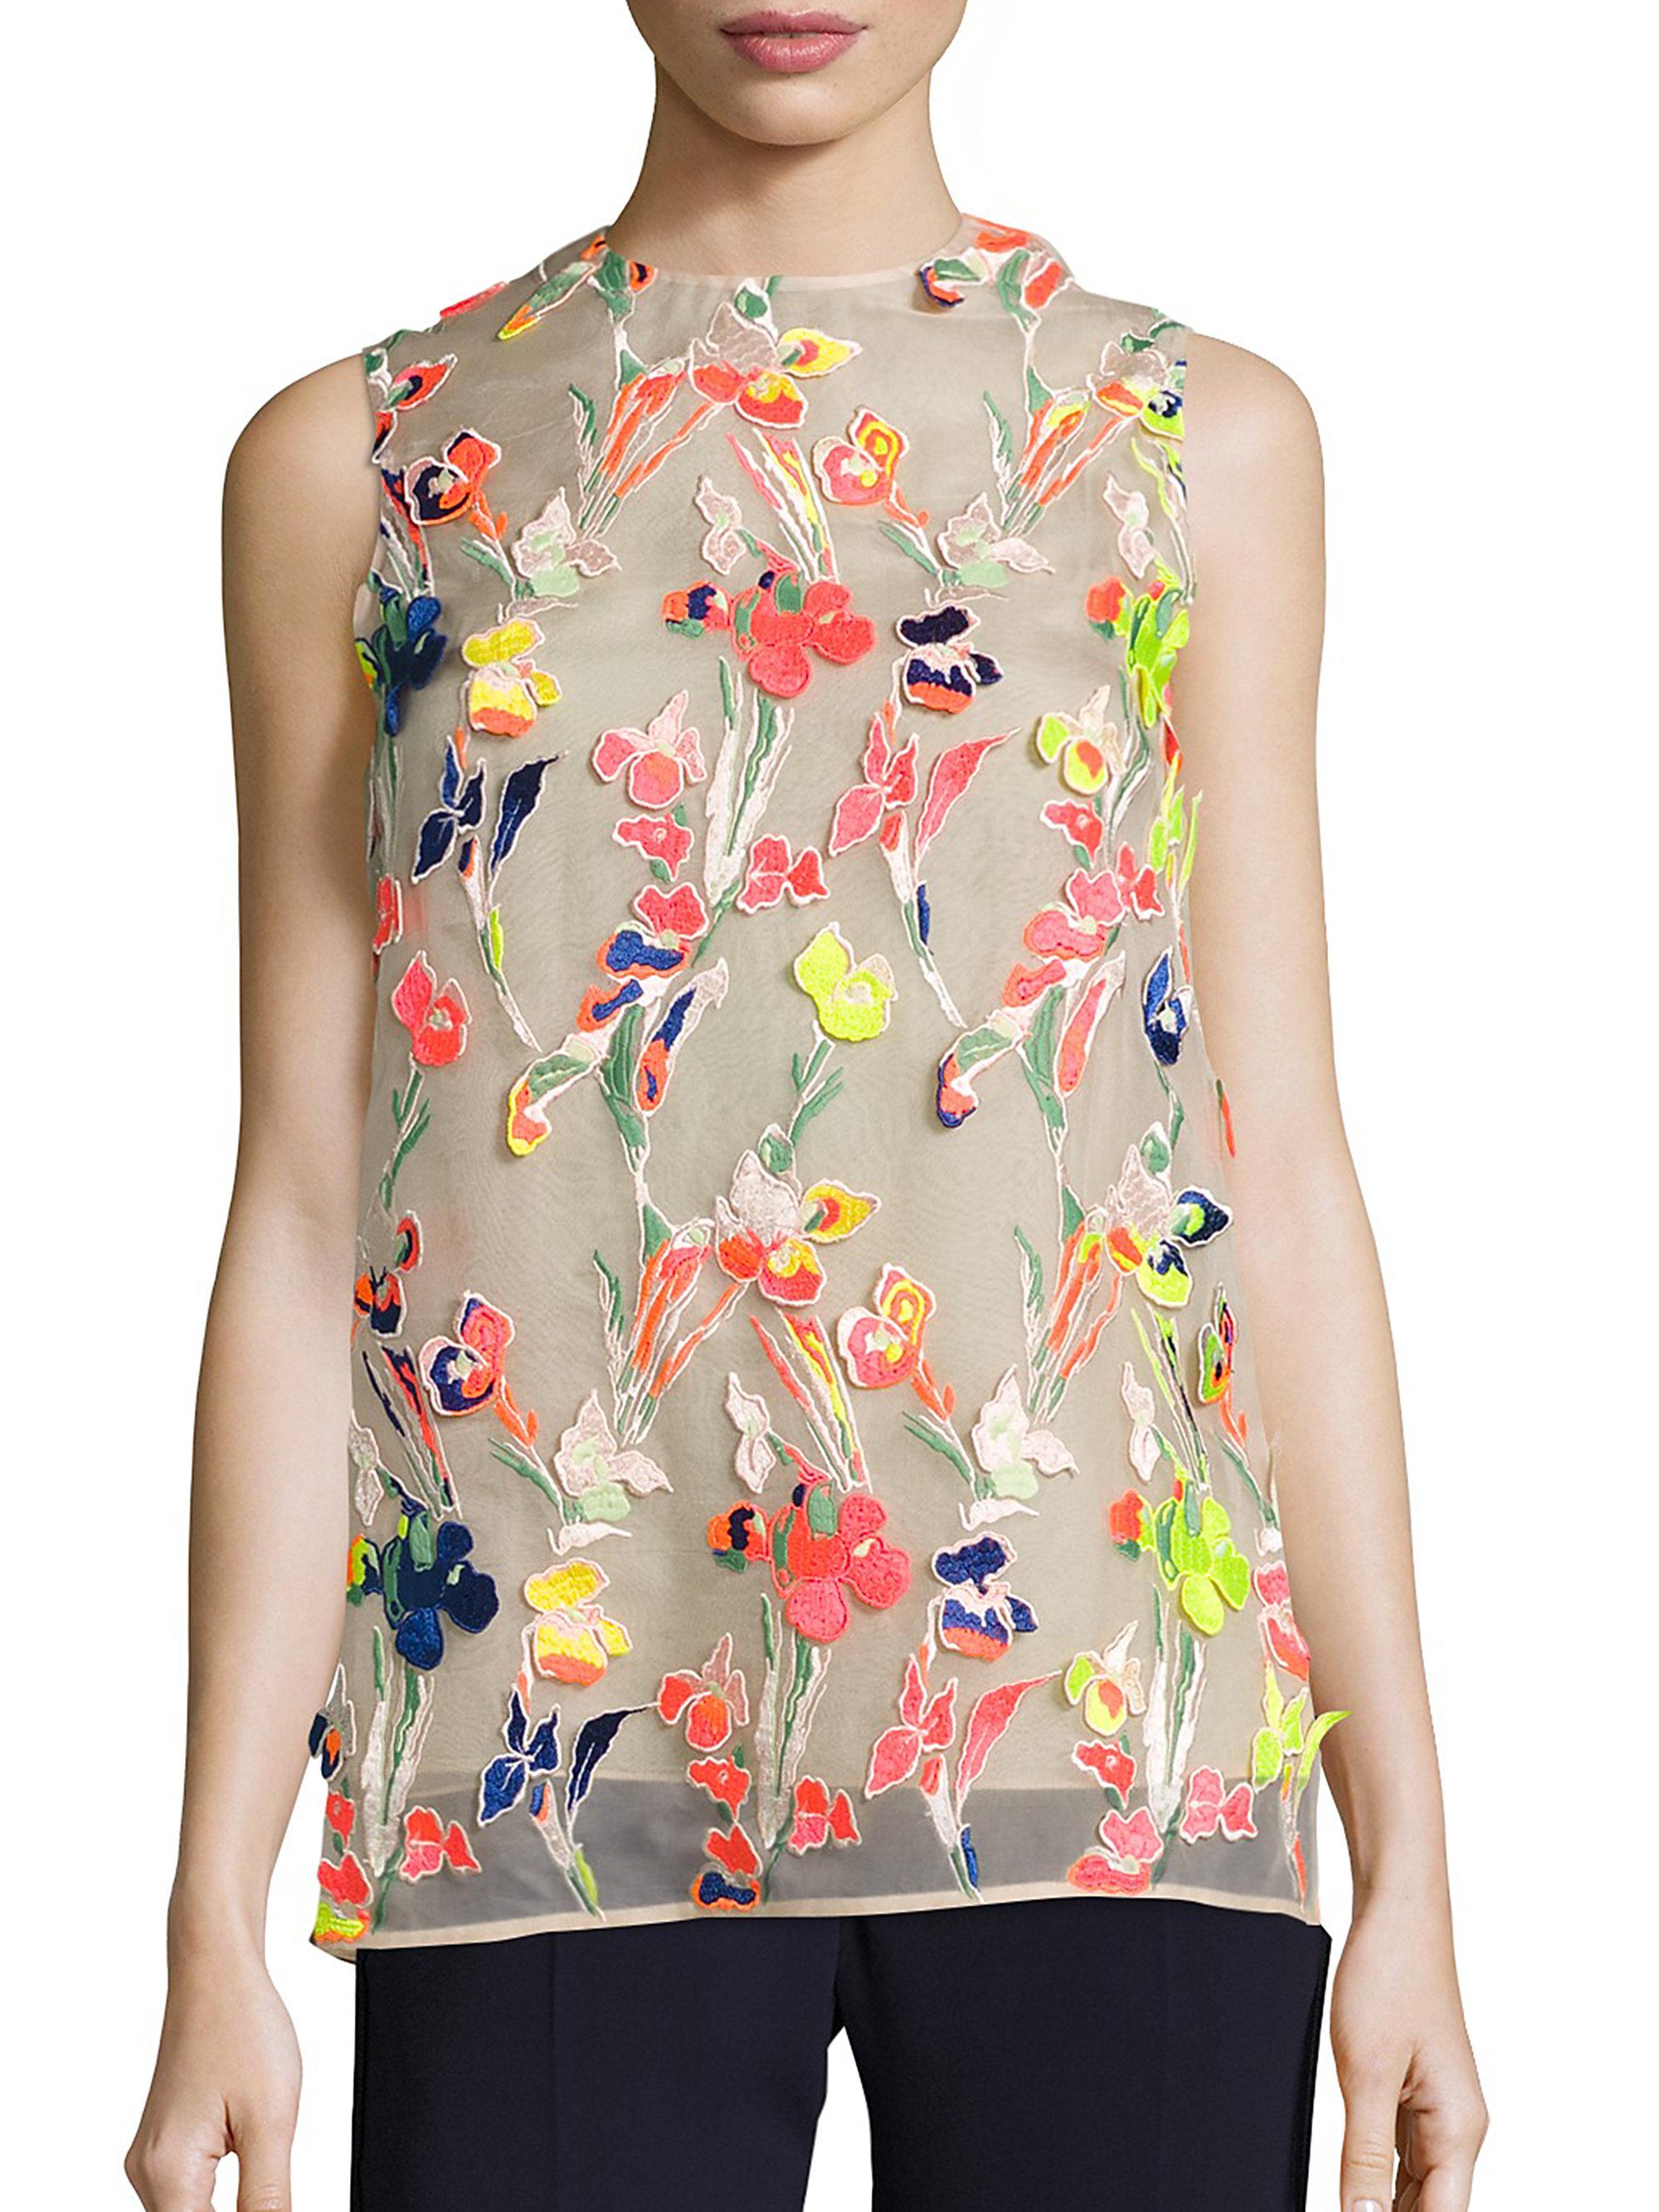 Lyst - Jason wu Floral Embroidered Blouse in Pink